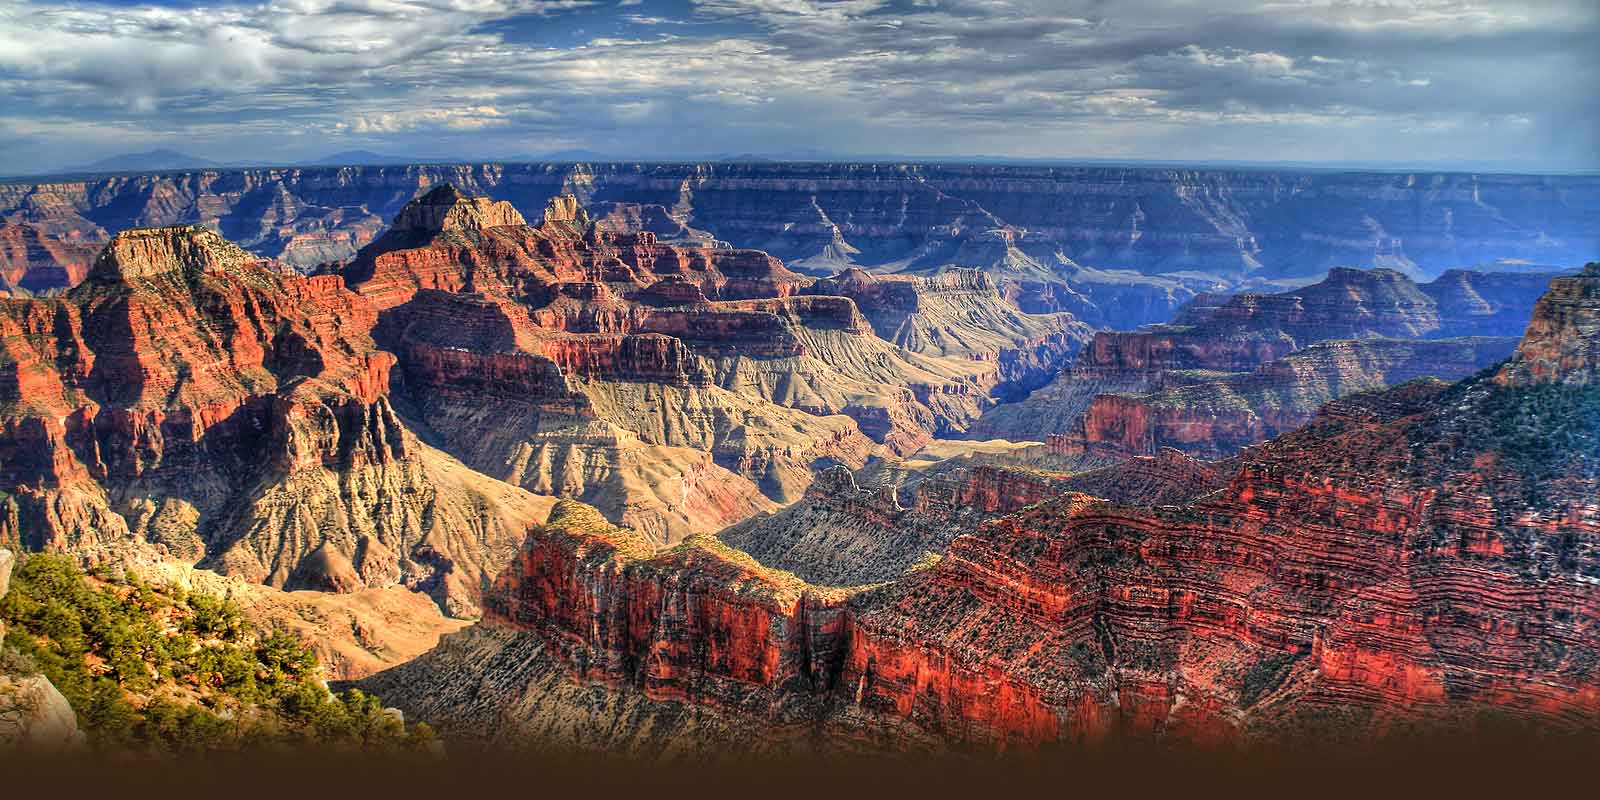 This is another picture of the grand canyon